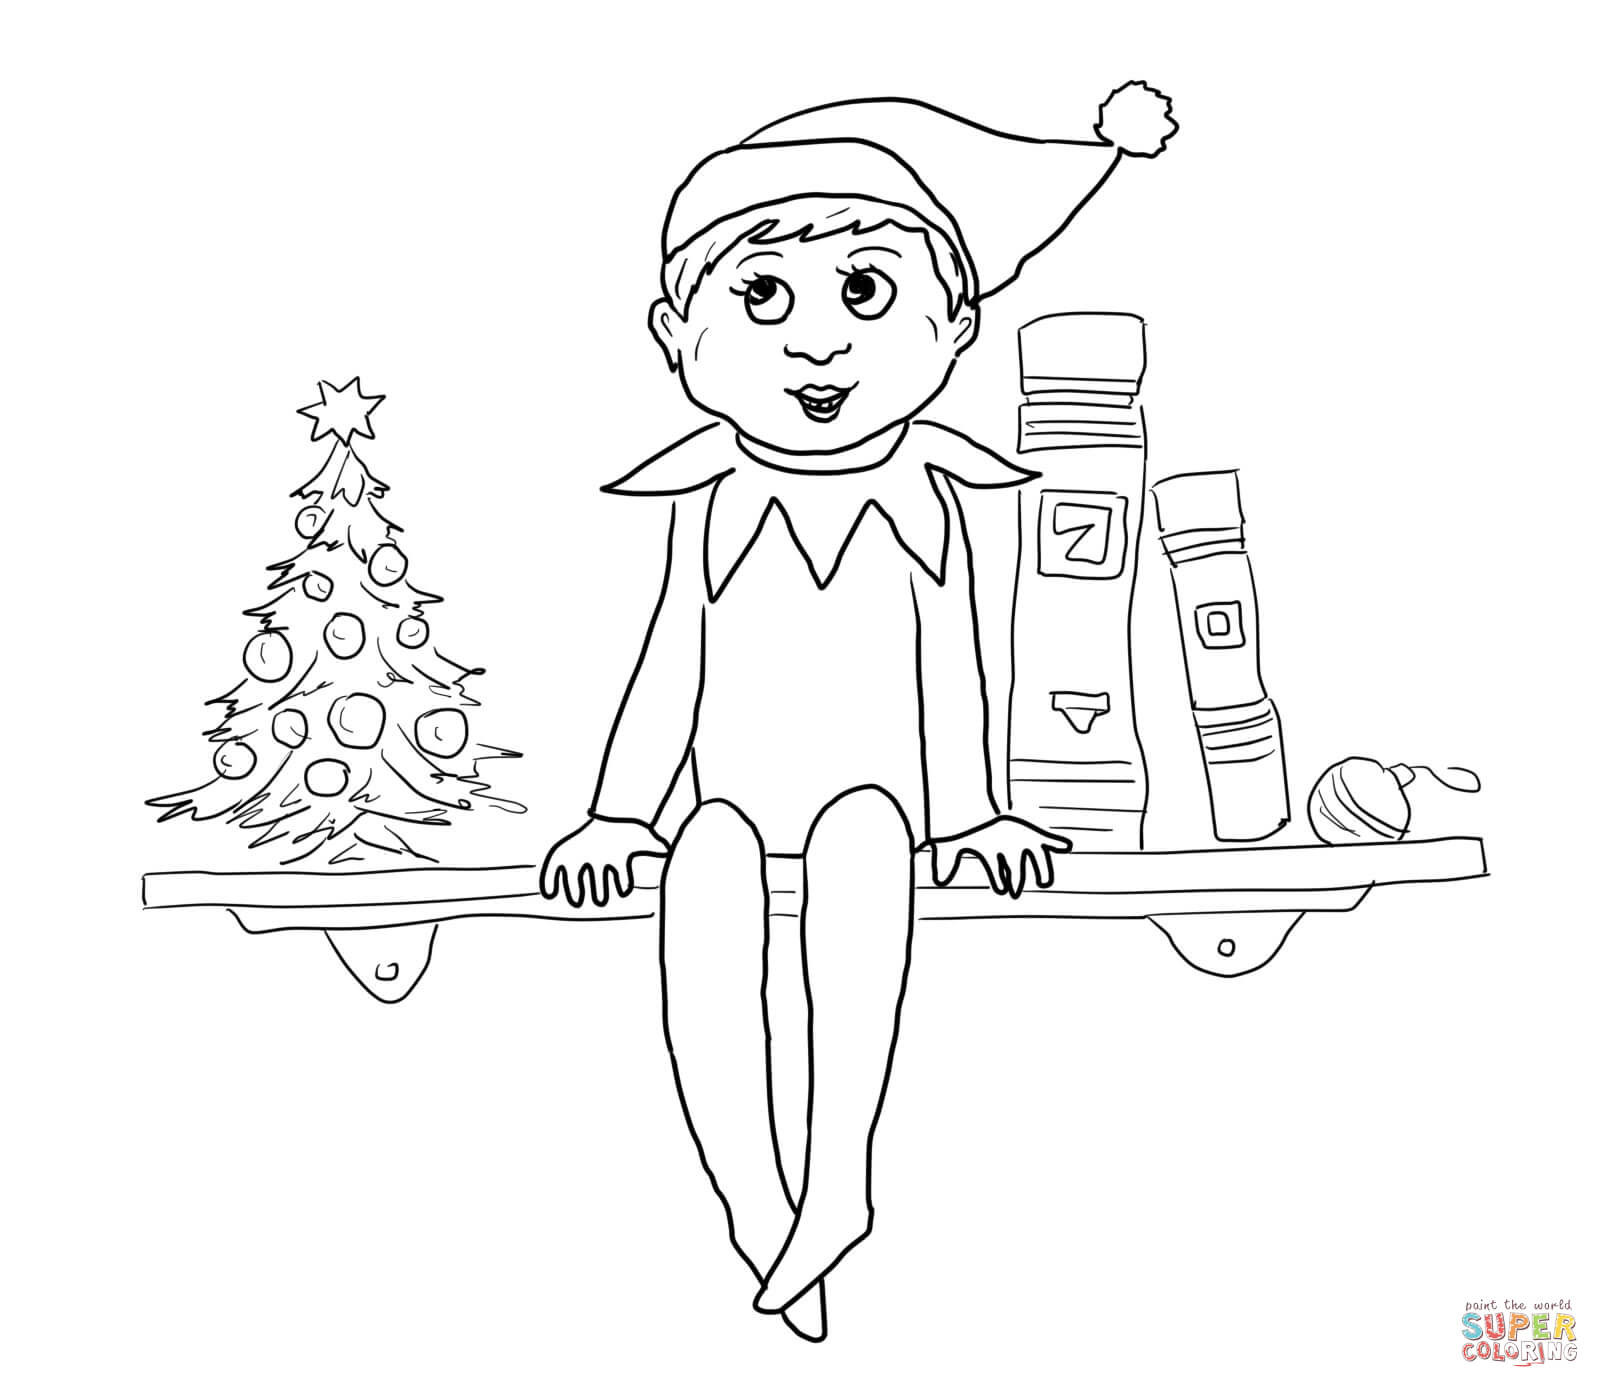 Elf Coloring Pages Printable
 Elf The Shelf To Color Coloring Home